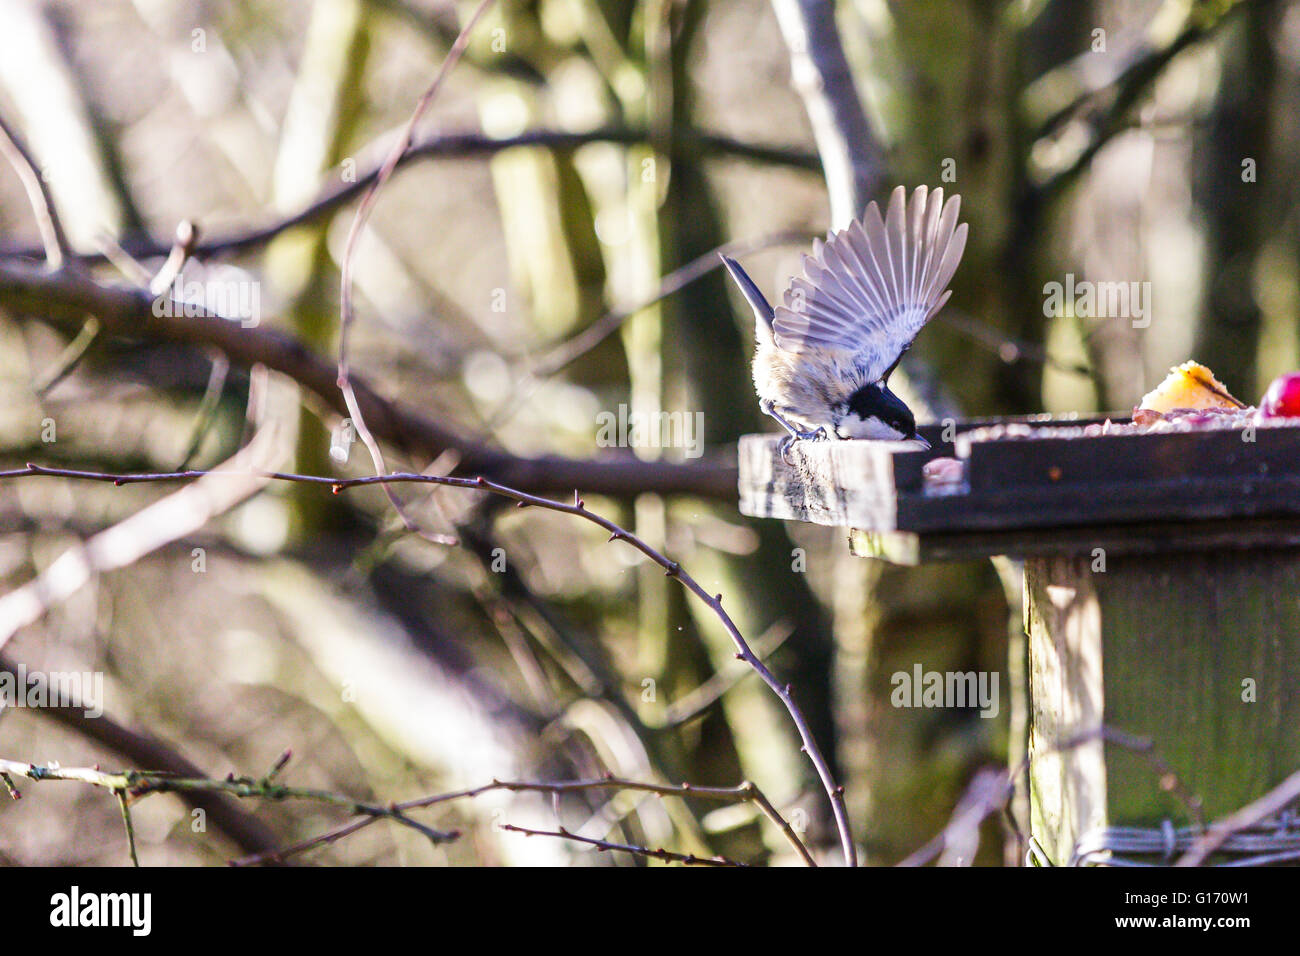 A Nuthatch showing flight feathers eating at a bird table Stock Photo